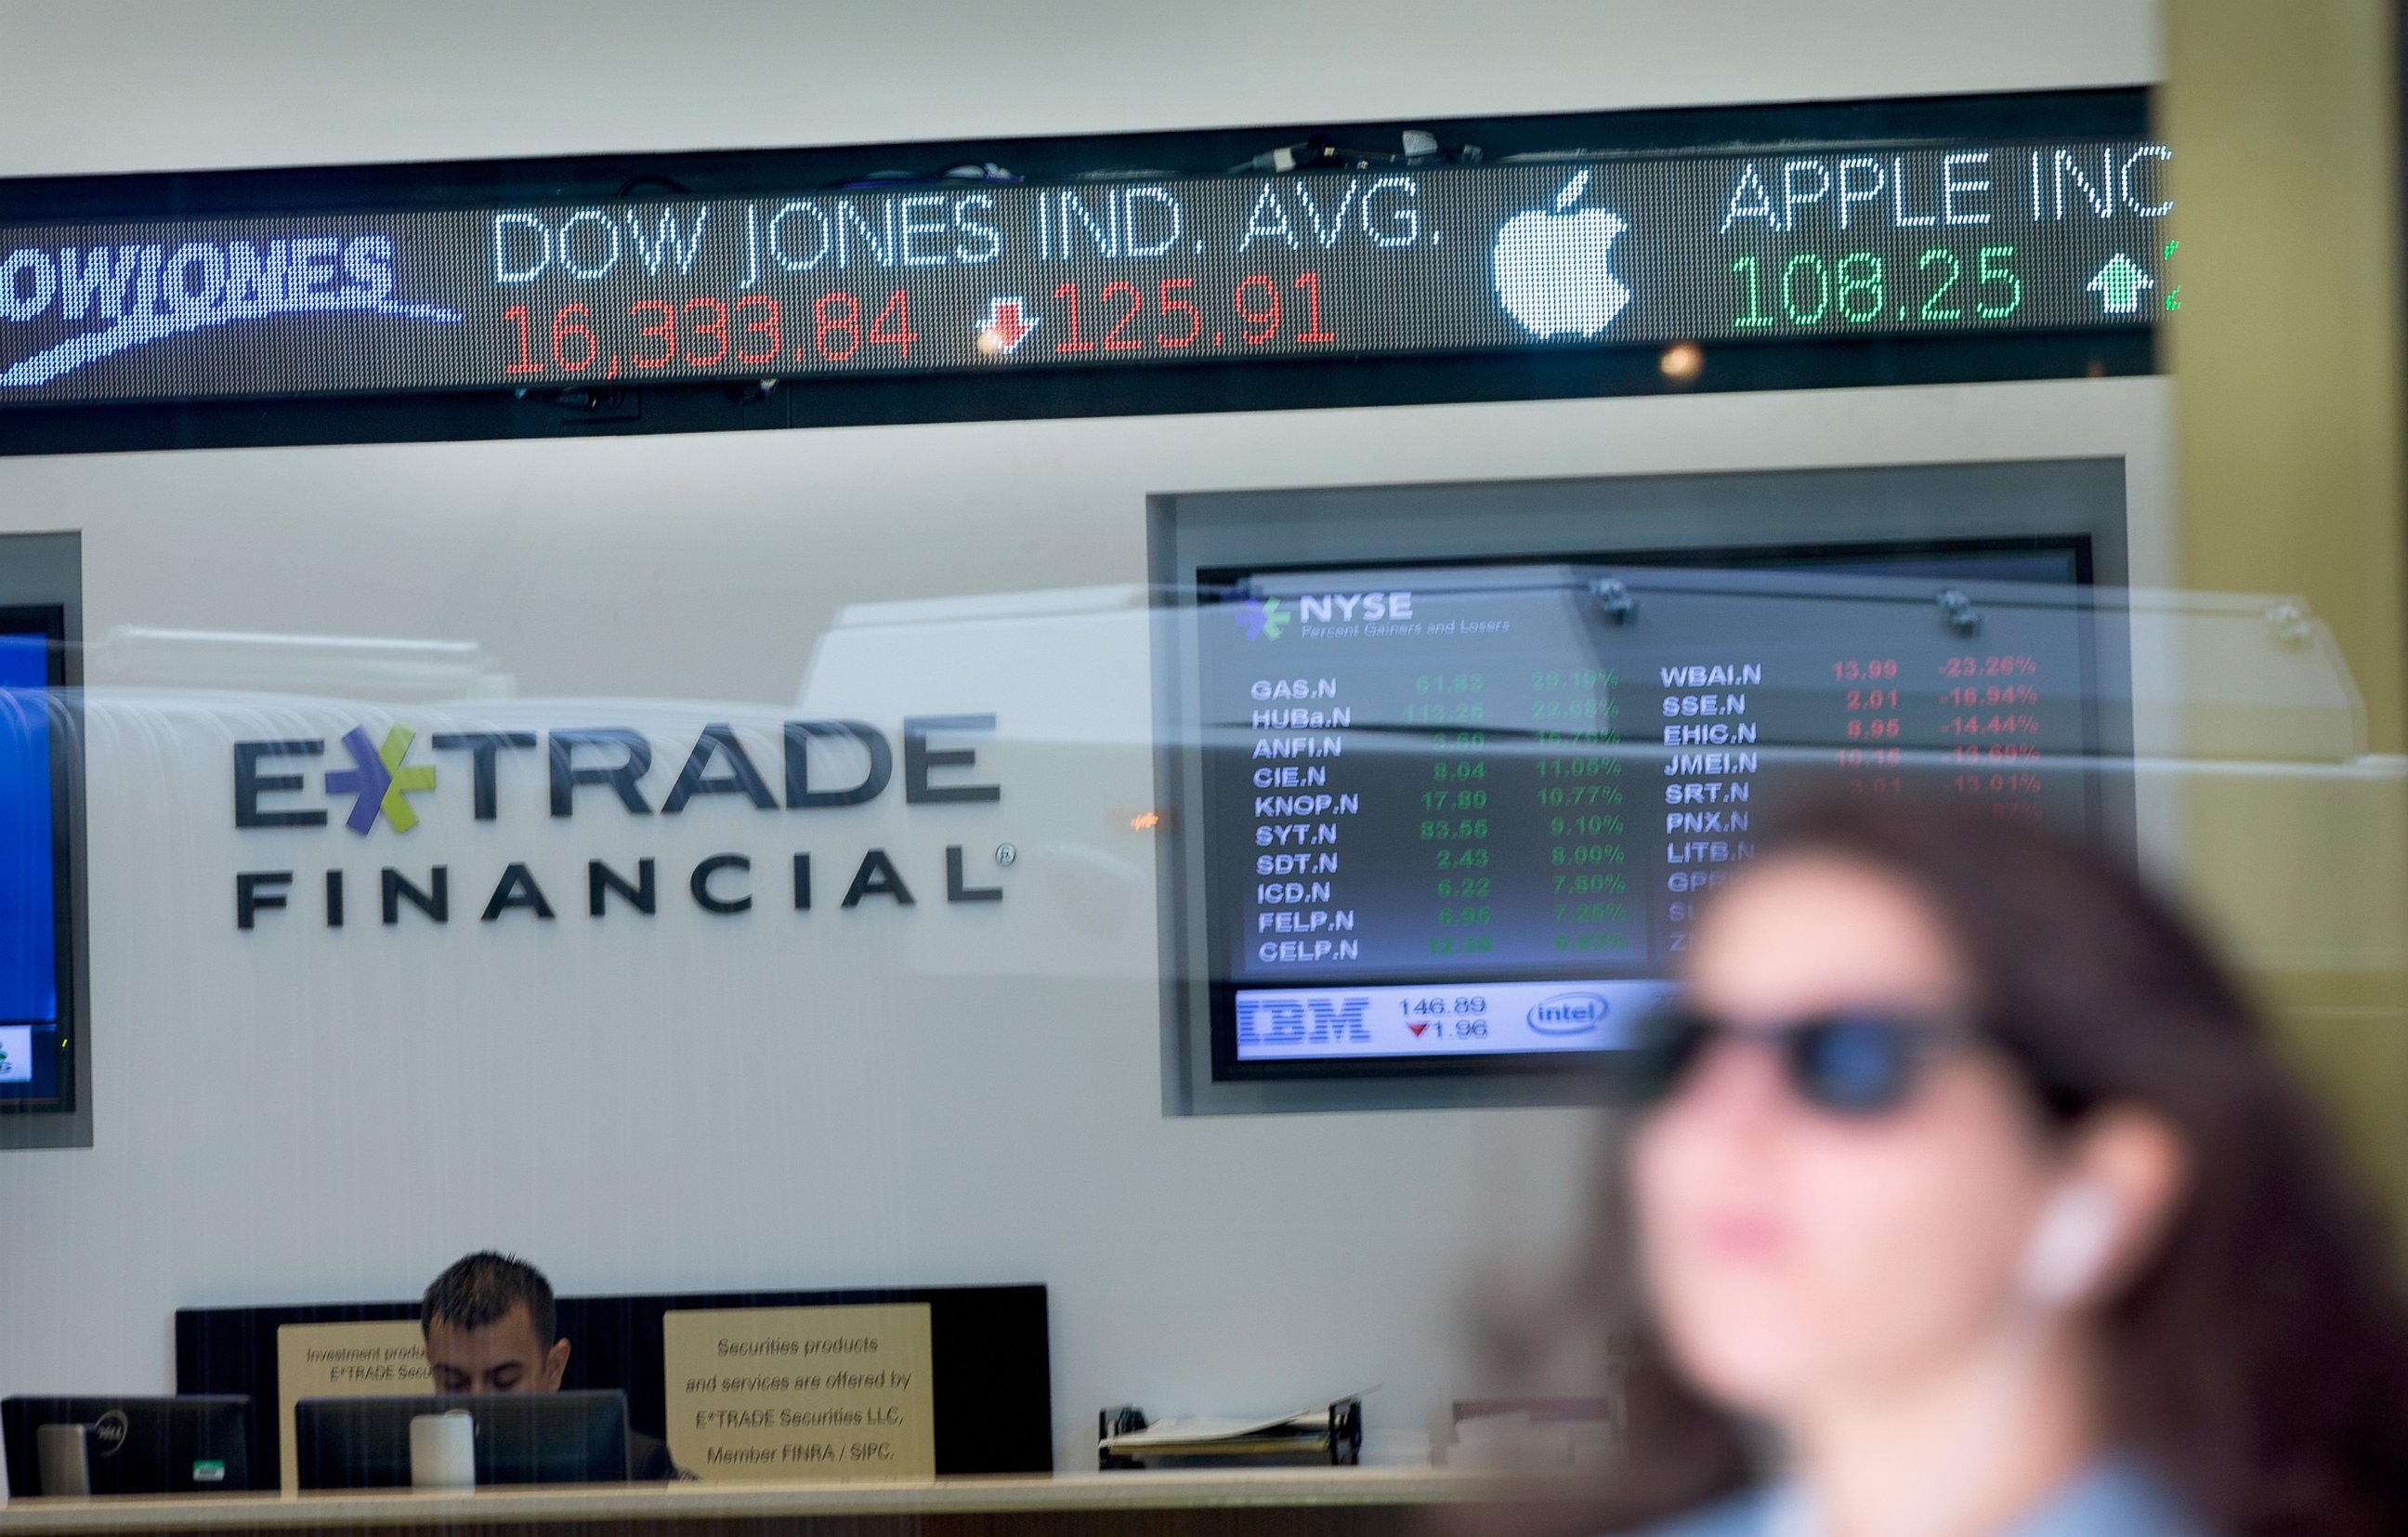 PHOTO: Stock prices are flashed across a screen in the lobby of an E-Trade branch on Aug. 24, 2015 in Chicago.